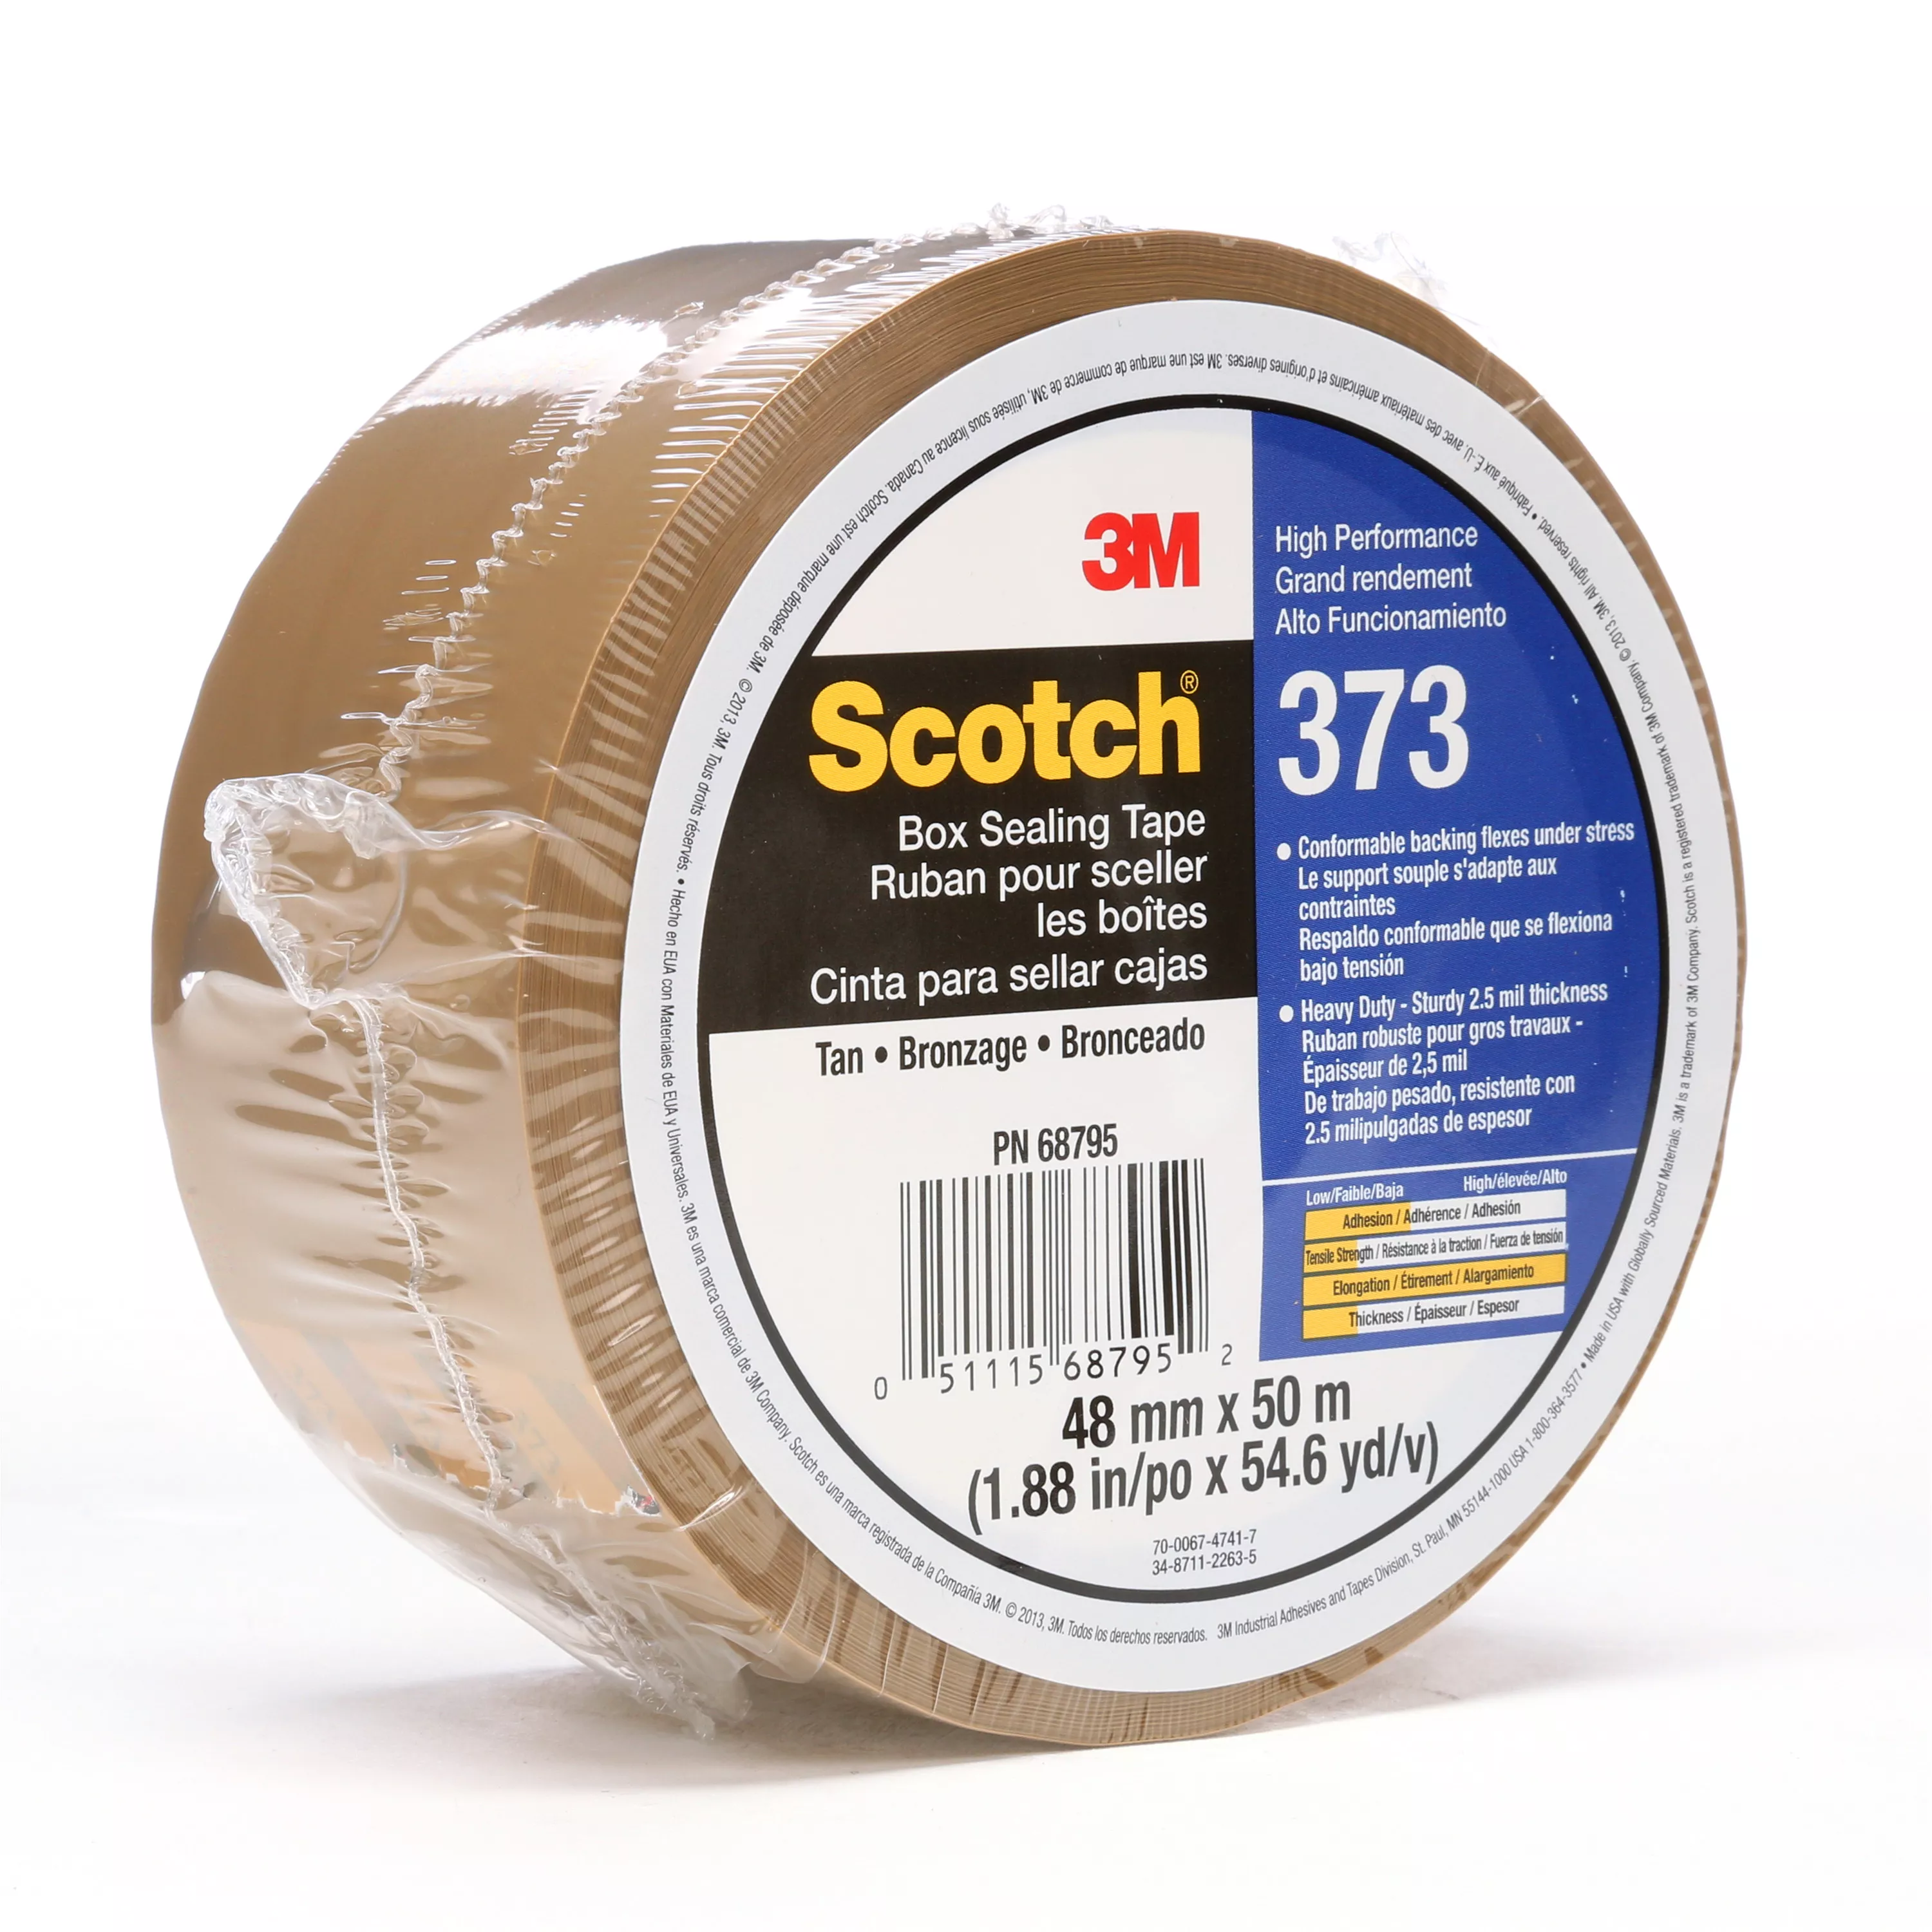 Scotch® Box Sealing Tape 373, Tan, 48 mm x 50 m, 36/Case, Individually
Wrapped Conveniently Packaged